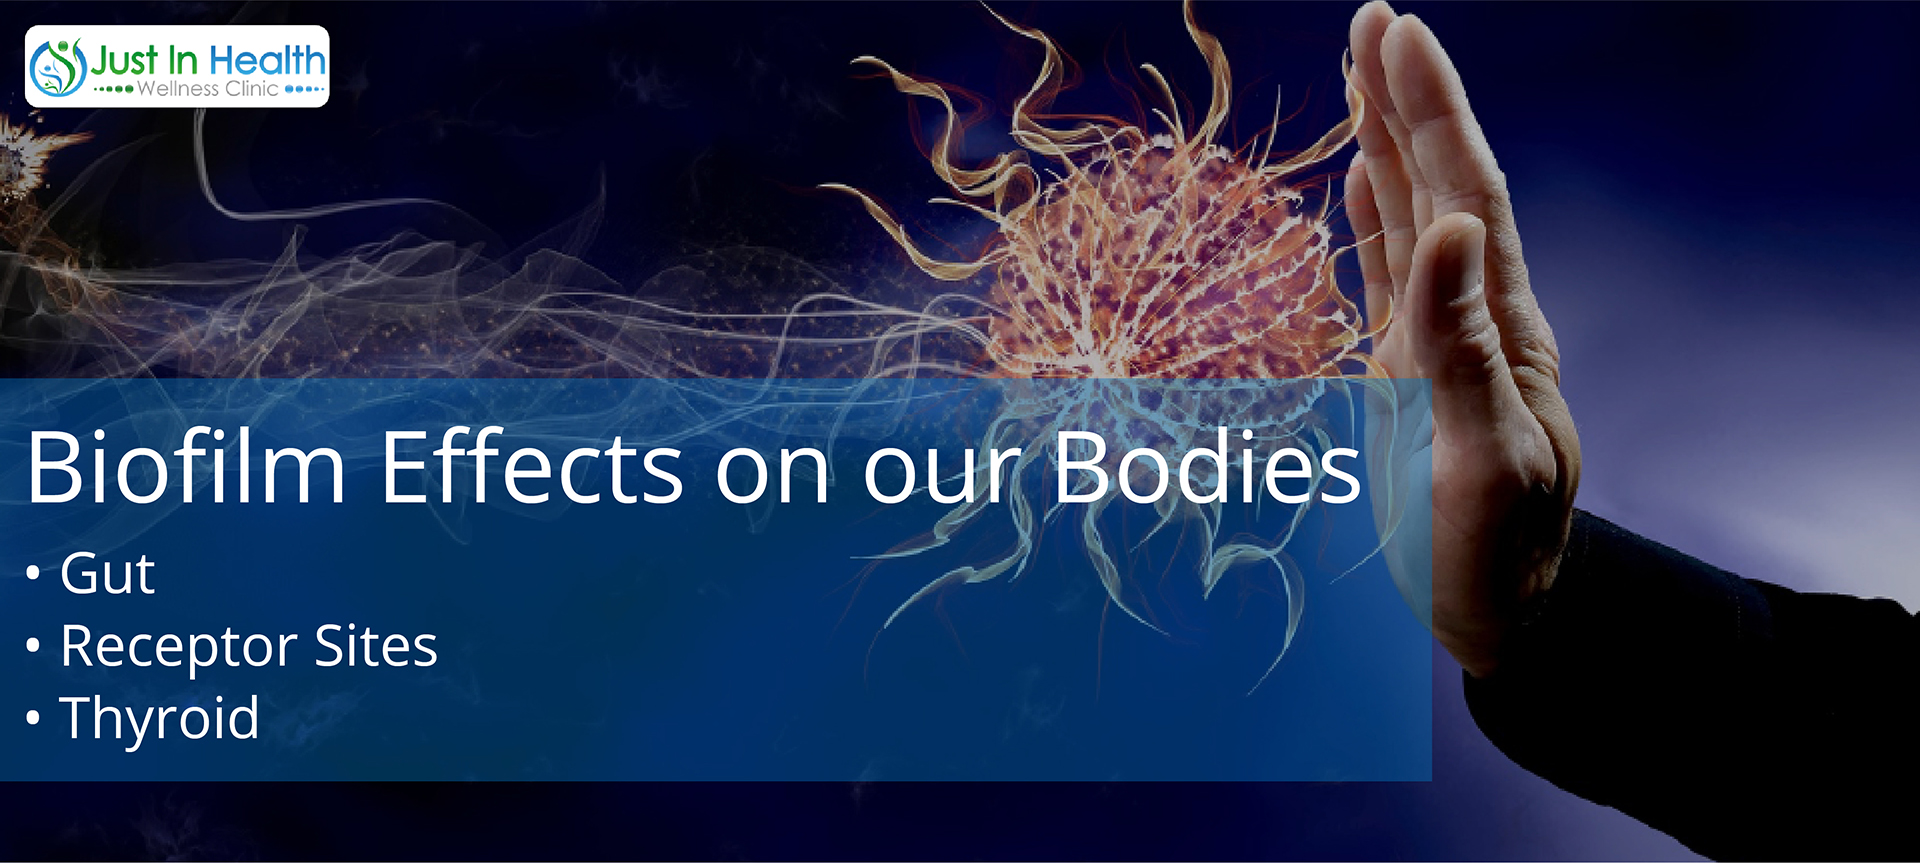 The effects of Biofilm on the body